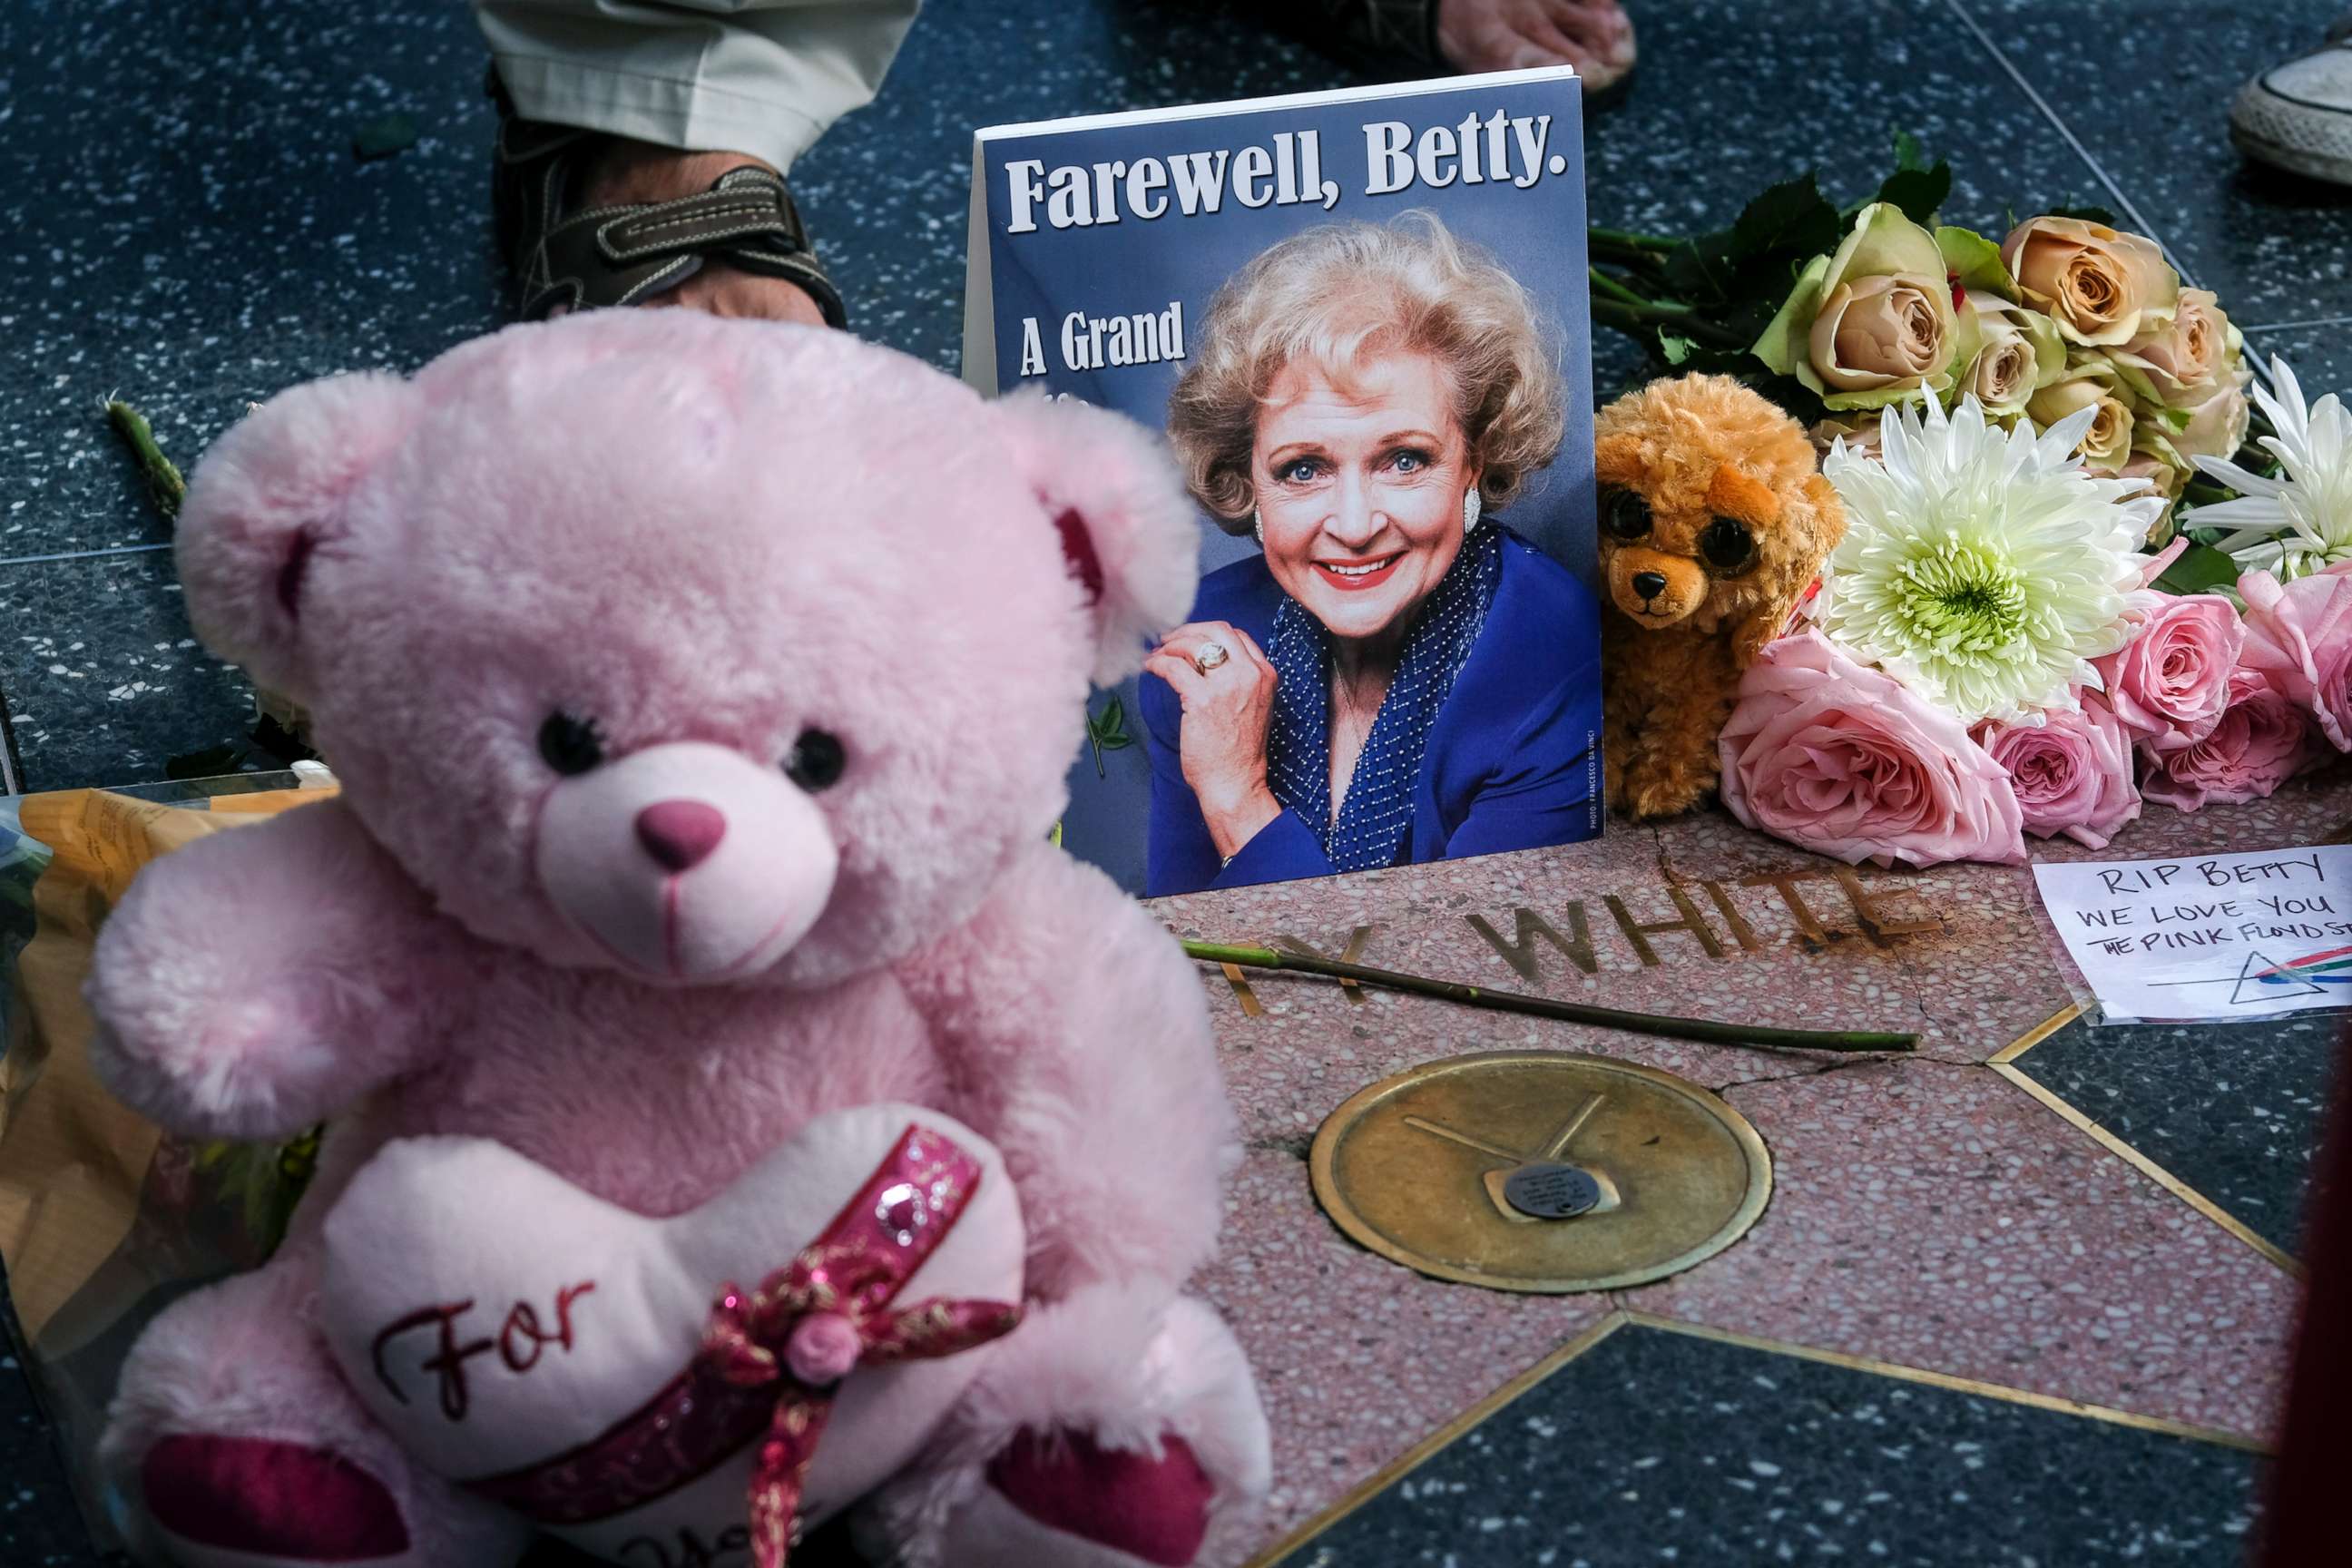 PHOTO: Flowers, stuff toys and cards are displayed at the Hollywood Walk of Fame star of the late actress Betty White, Dec. 31, 2021, in Los Angeles.